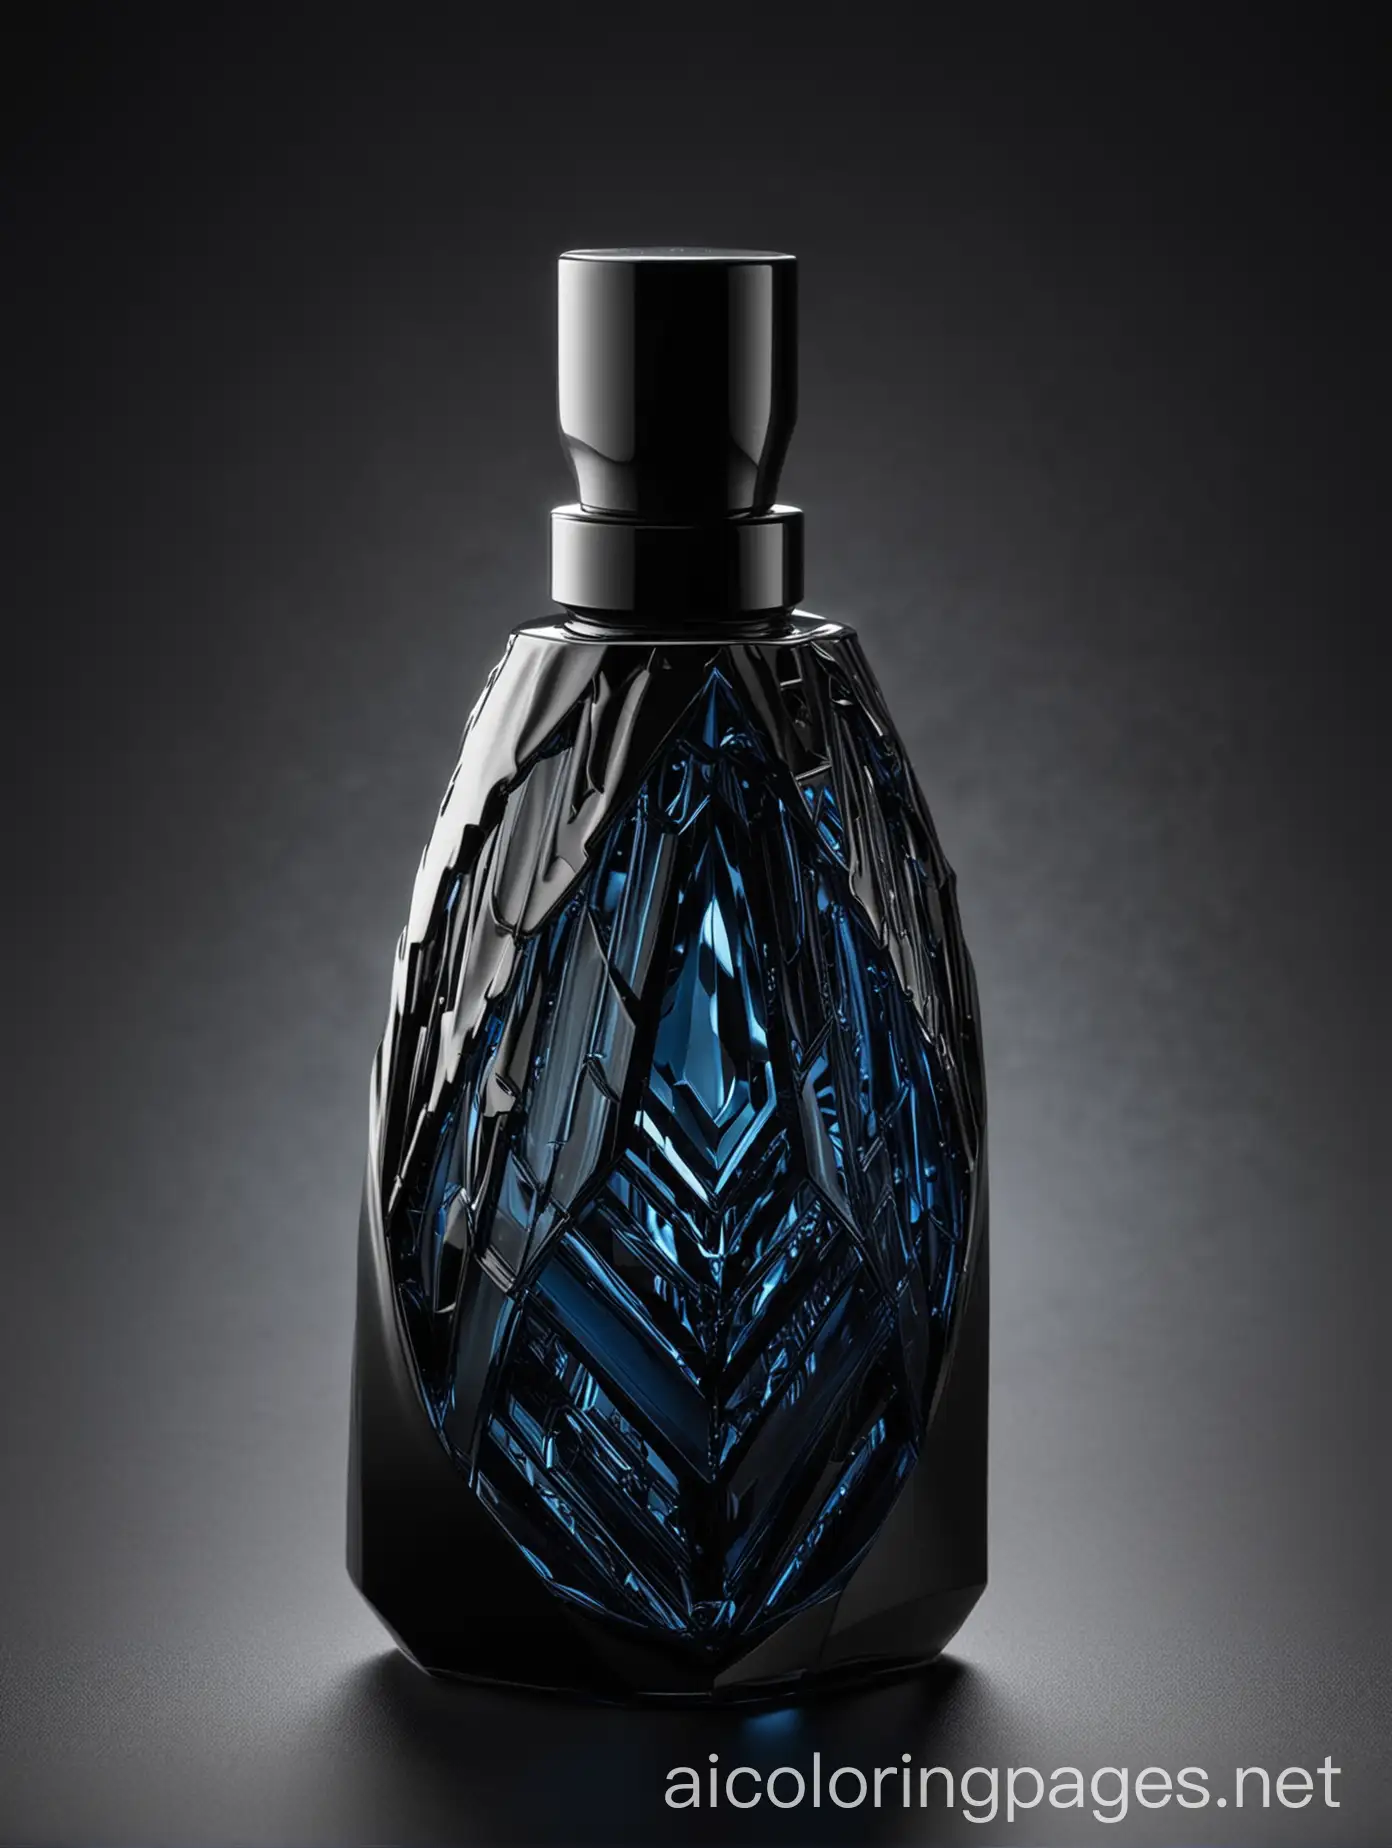 Bold-and-Modern-Mens-Perfume-Bottle-with-Geometric-Design